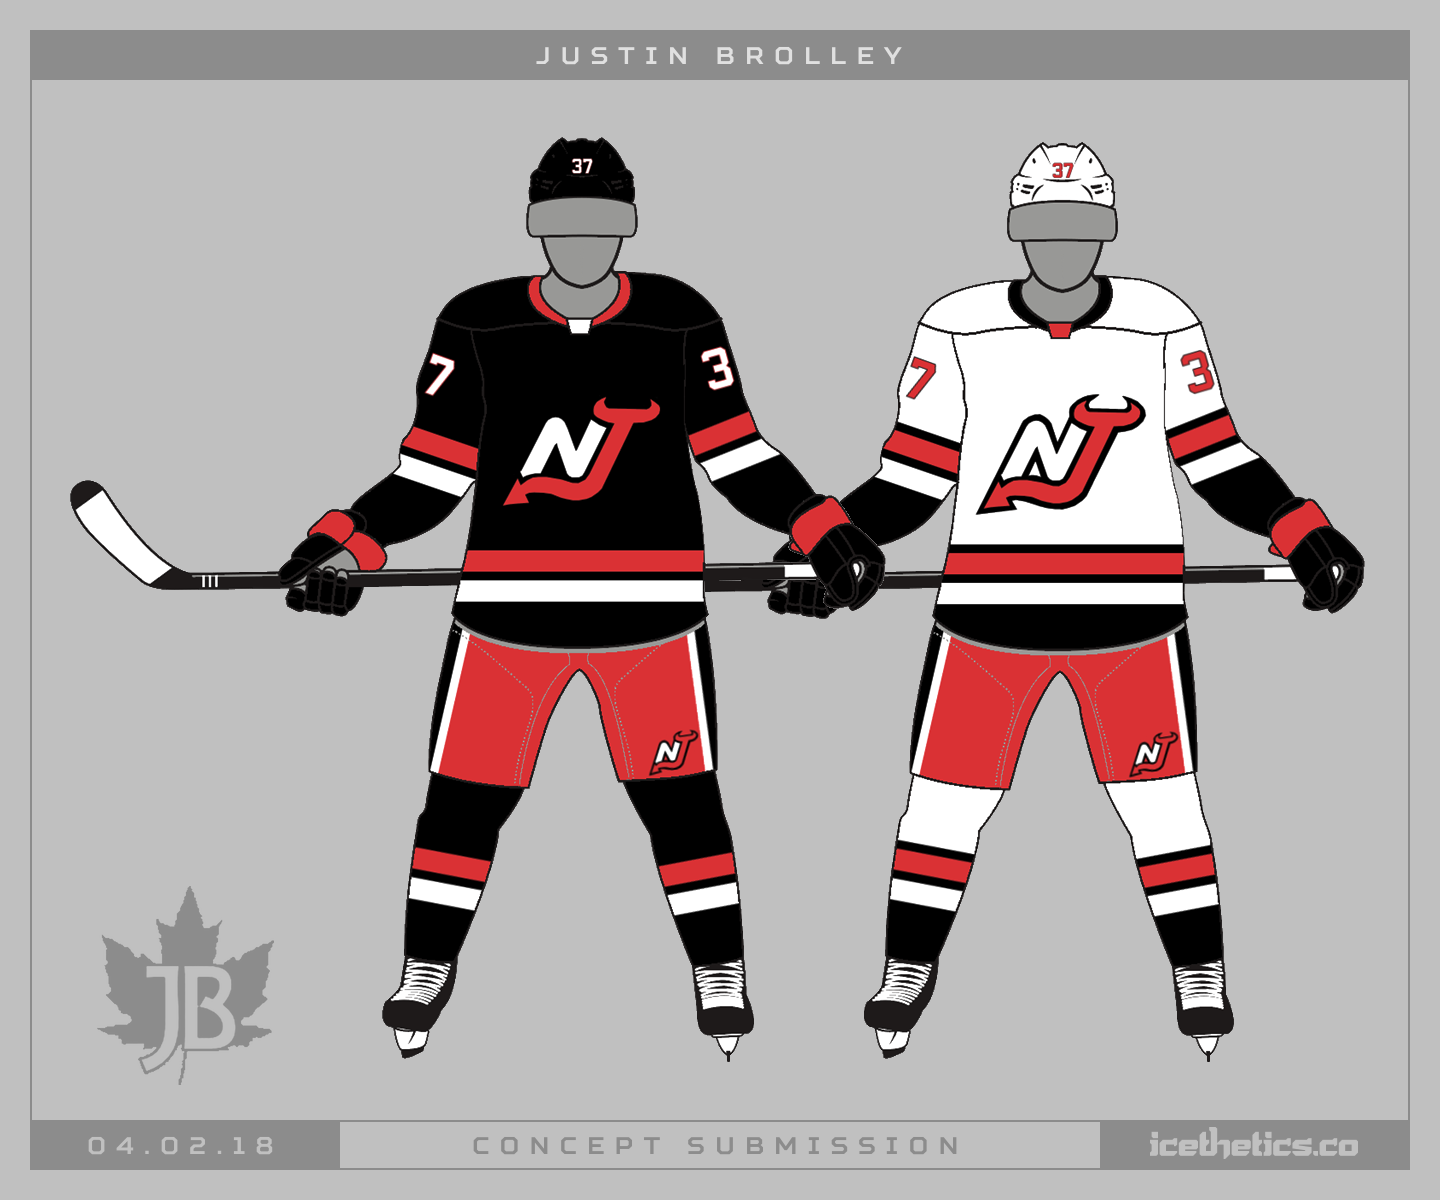 Lucas Daitchman on X: A #NJDevils concept blending the Devils' current  bold jersey striping pattern with their original design, complete with a  matching bolder logo.  / X